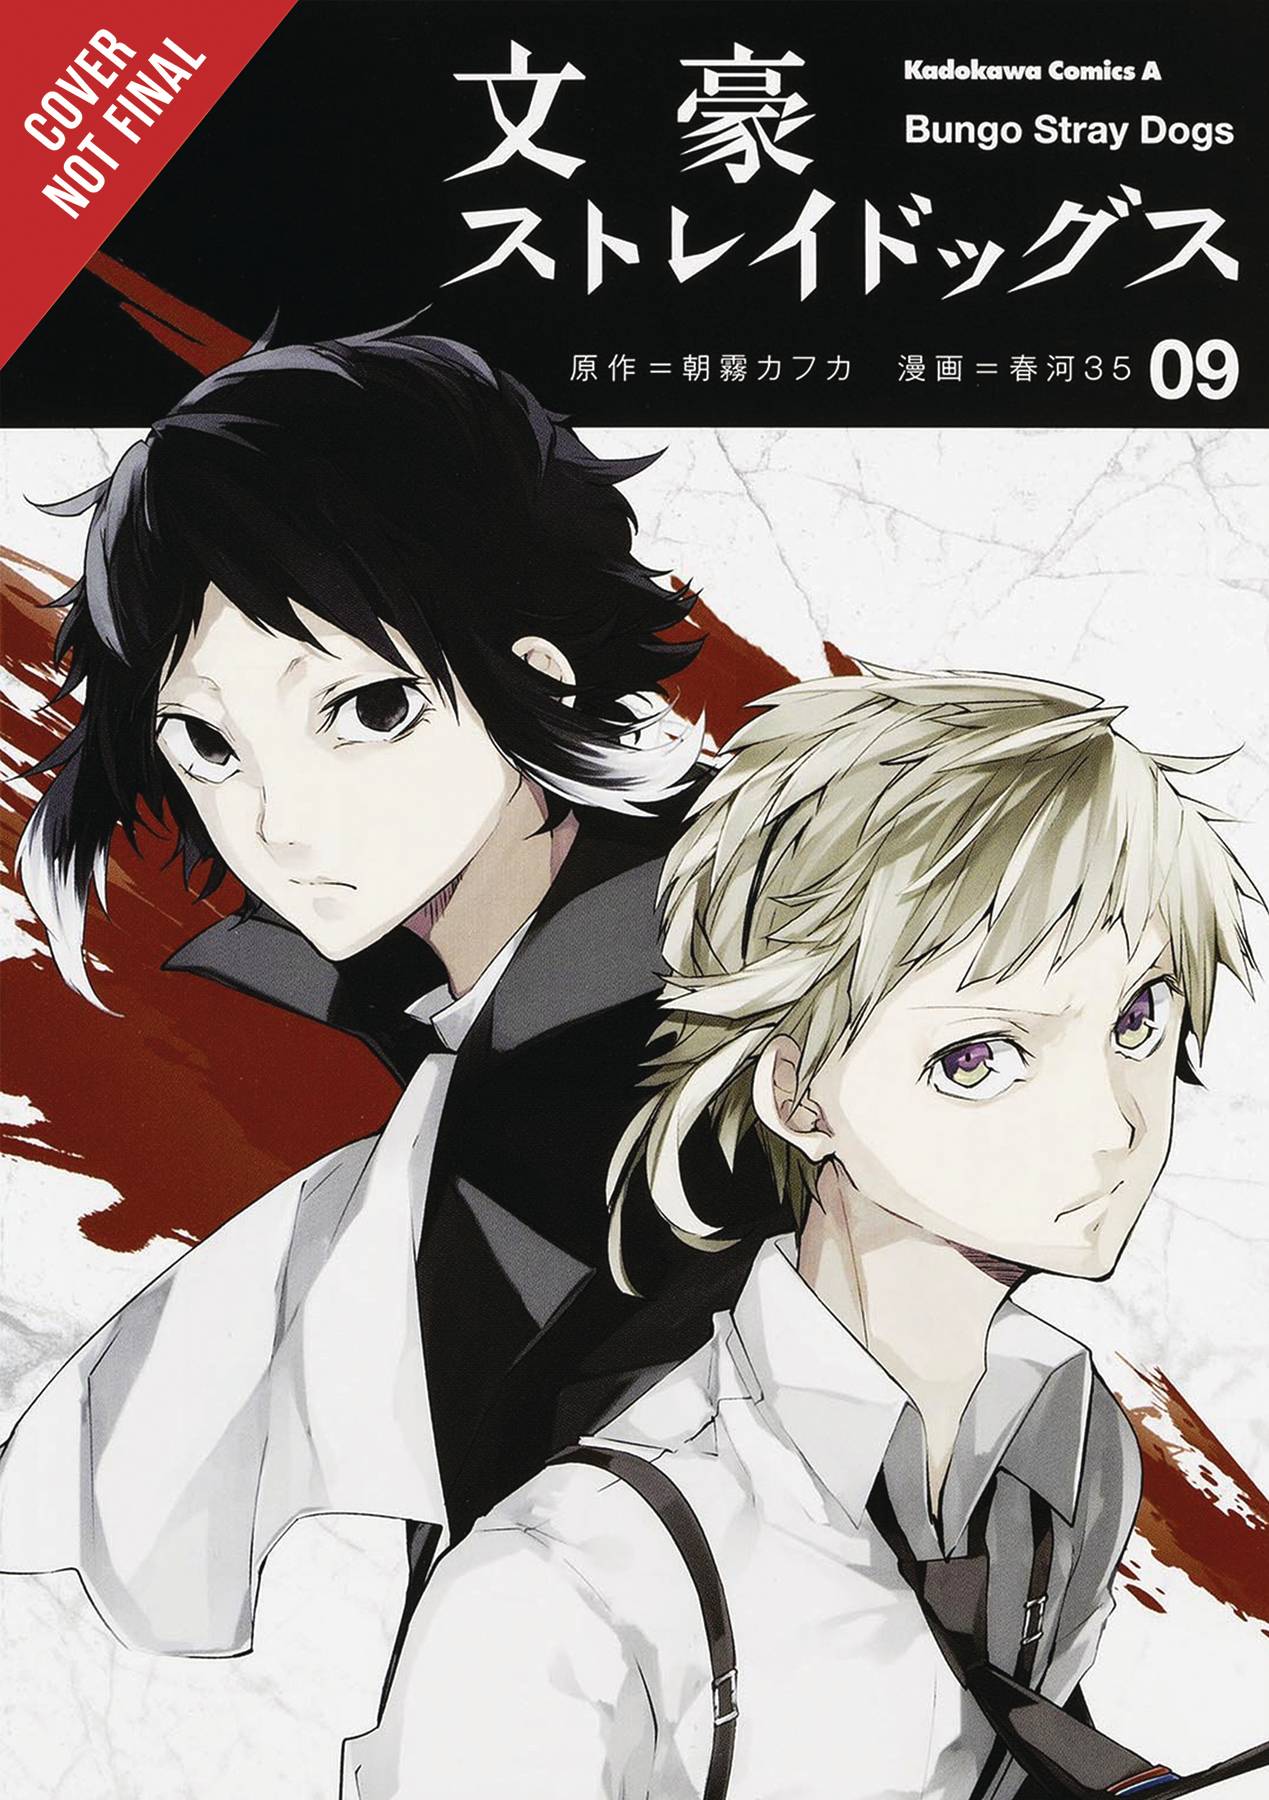 BUNGO STRAY DOGS GN VOL 09